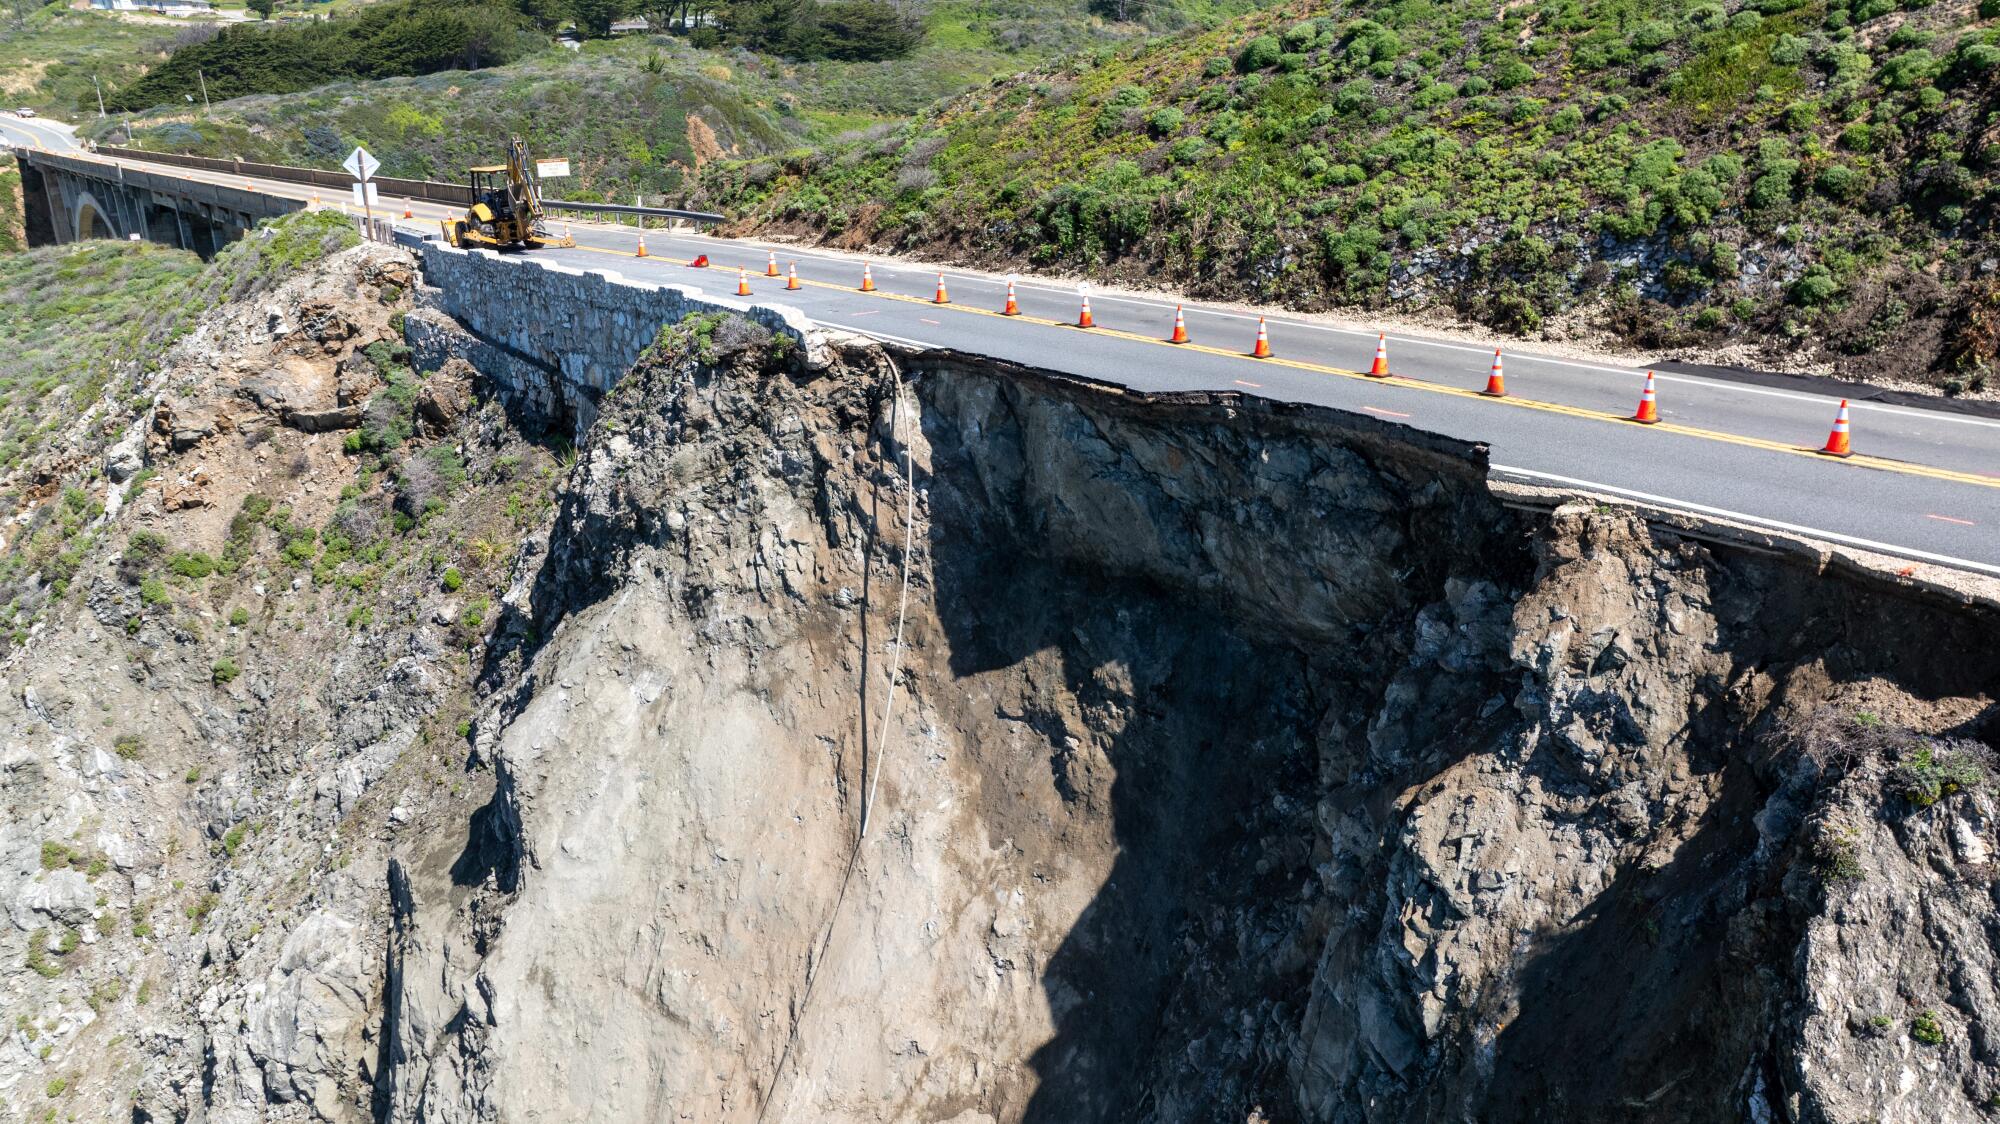 A line of orange cones sit in the middle of a damaged road on a cliff.